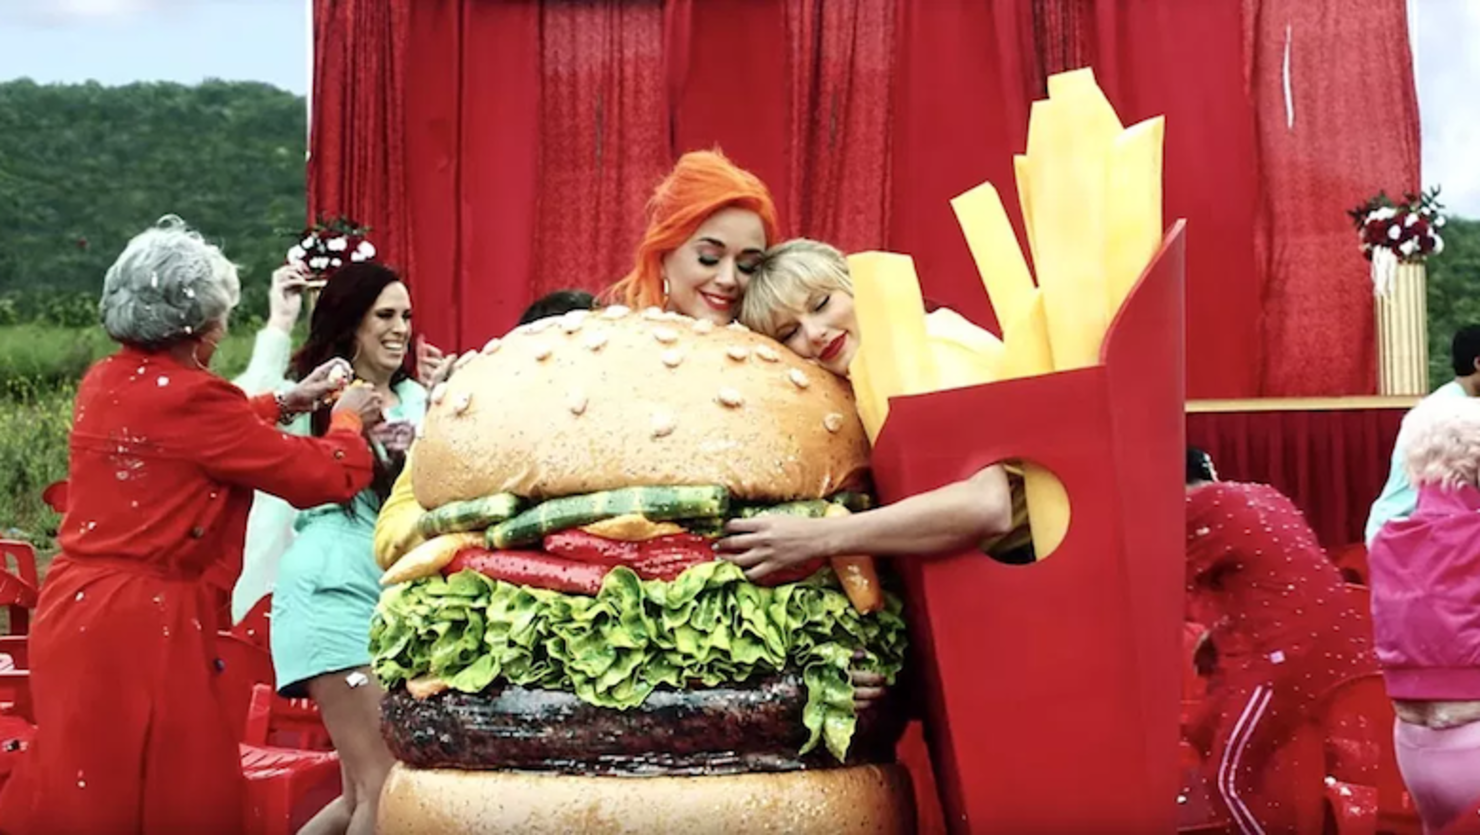 Taylor Swift And Katy Perry Hug It Out In You Need To Calm Down Music Video Iheart